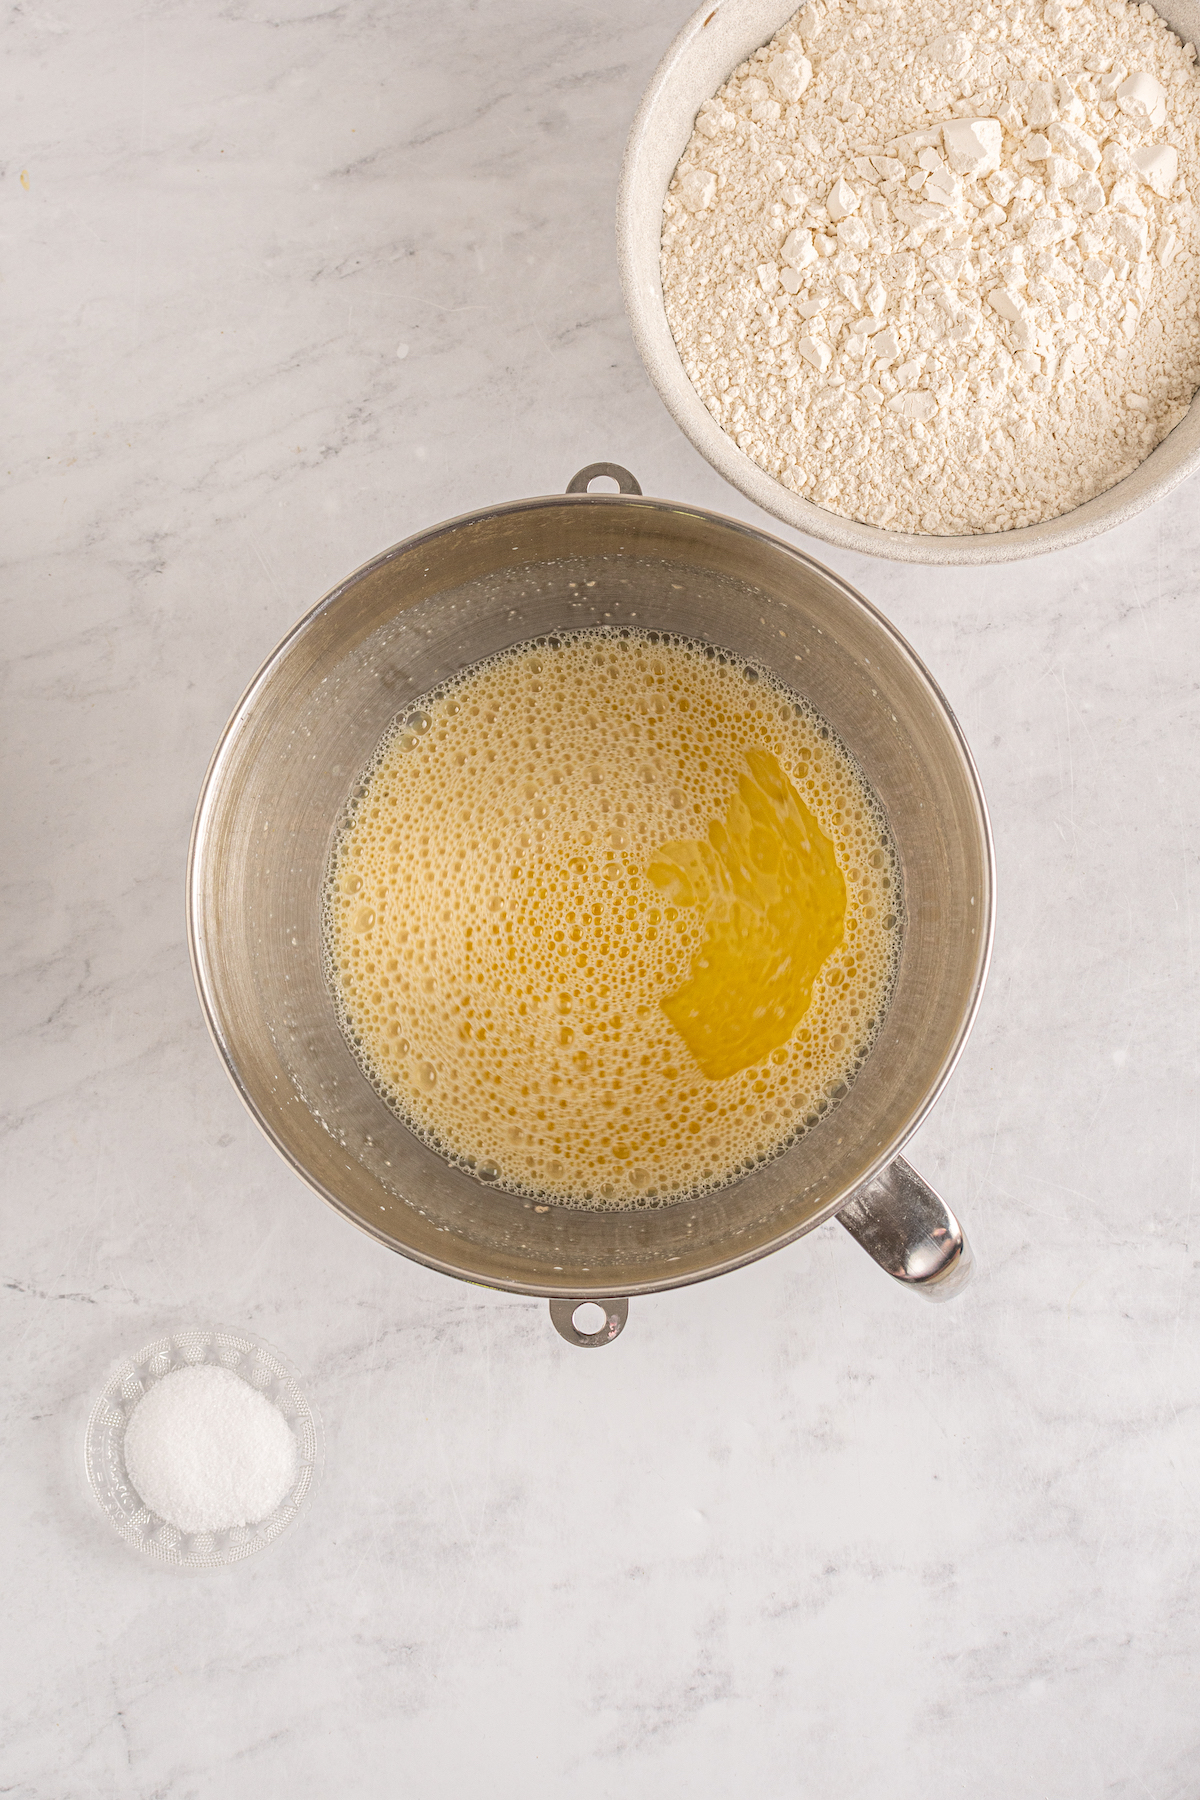 Melted butter, eggs, yeast, and other dinner roll ingredients in a metal mixing bowl.